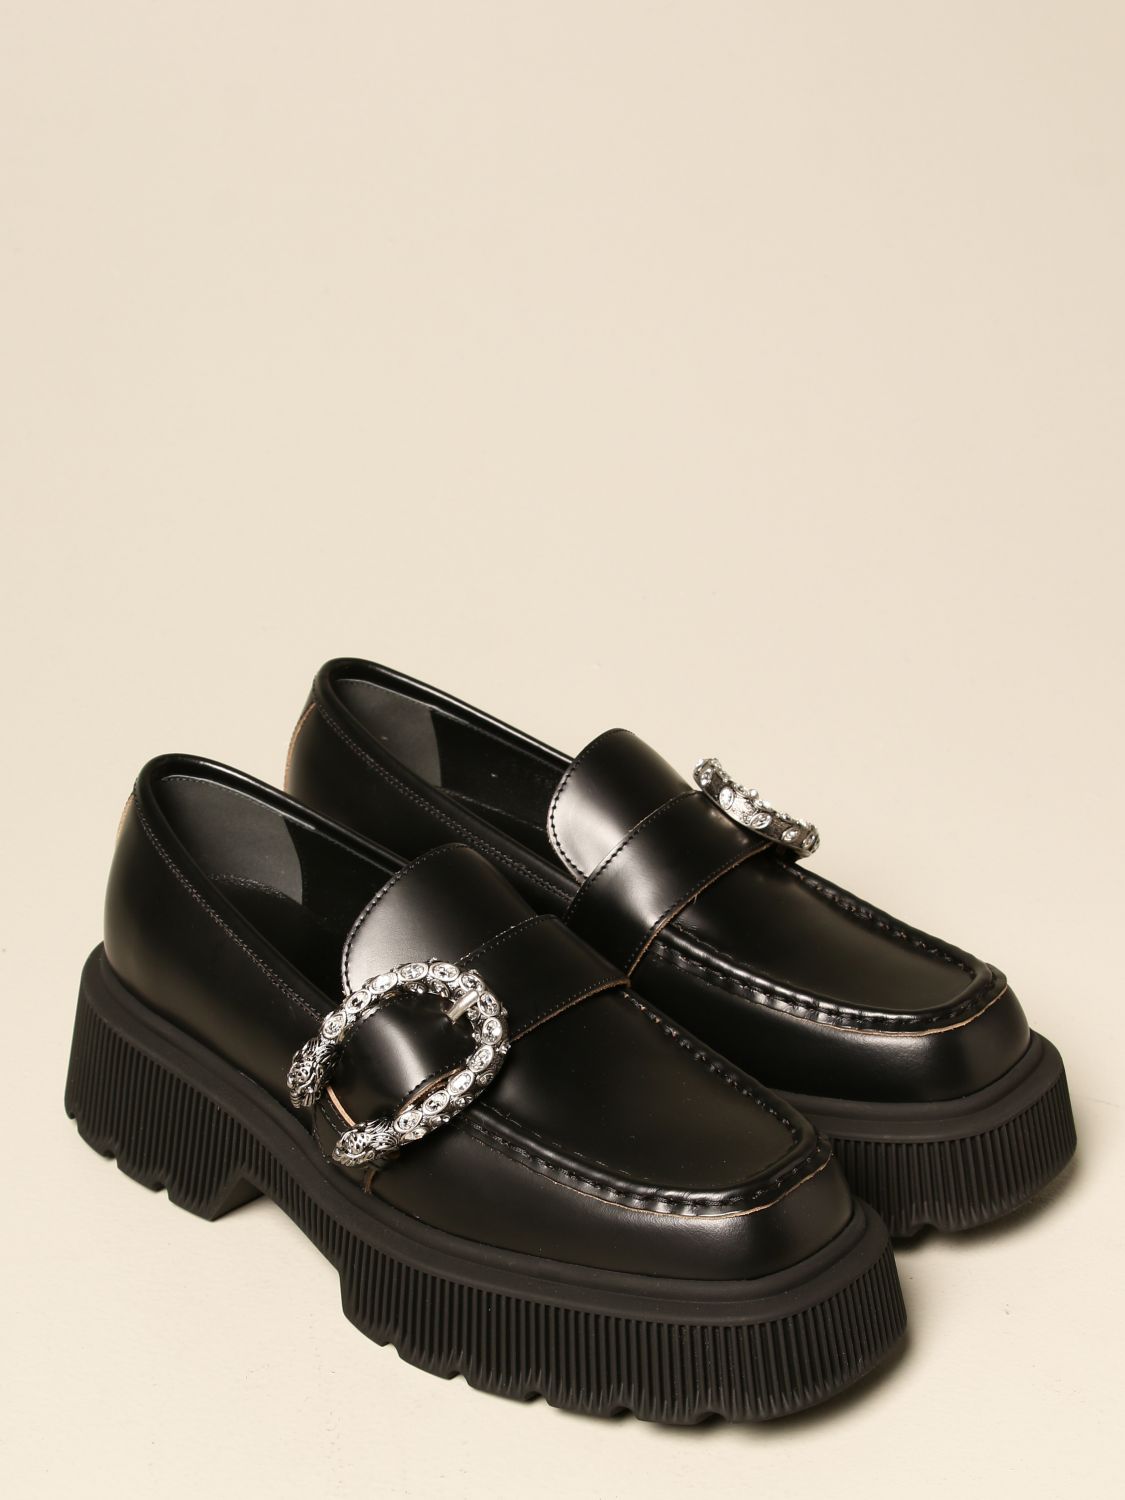 GUCCI: Shoes women | Loafers Gucci Women Black | Loafers Gucci 627289 ...